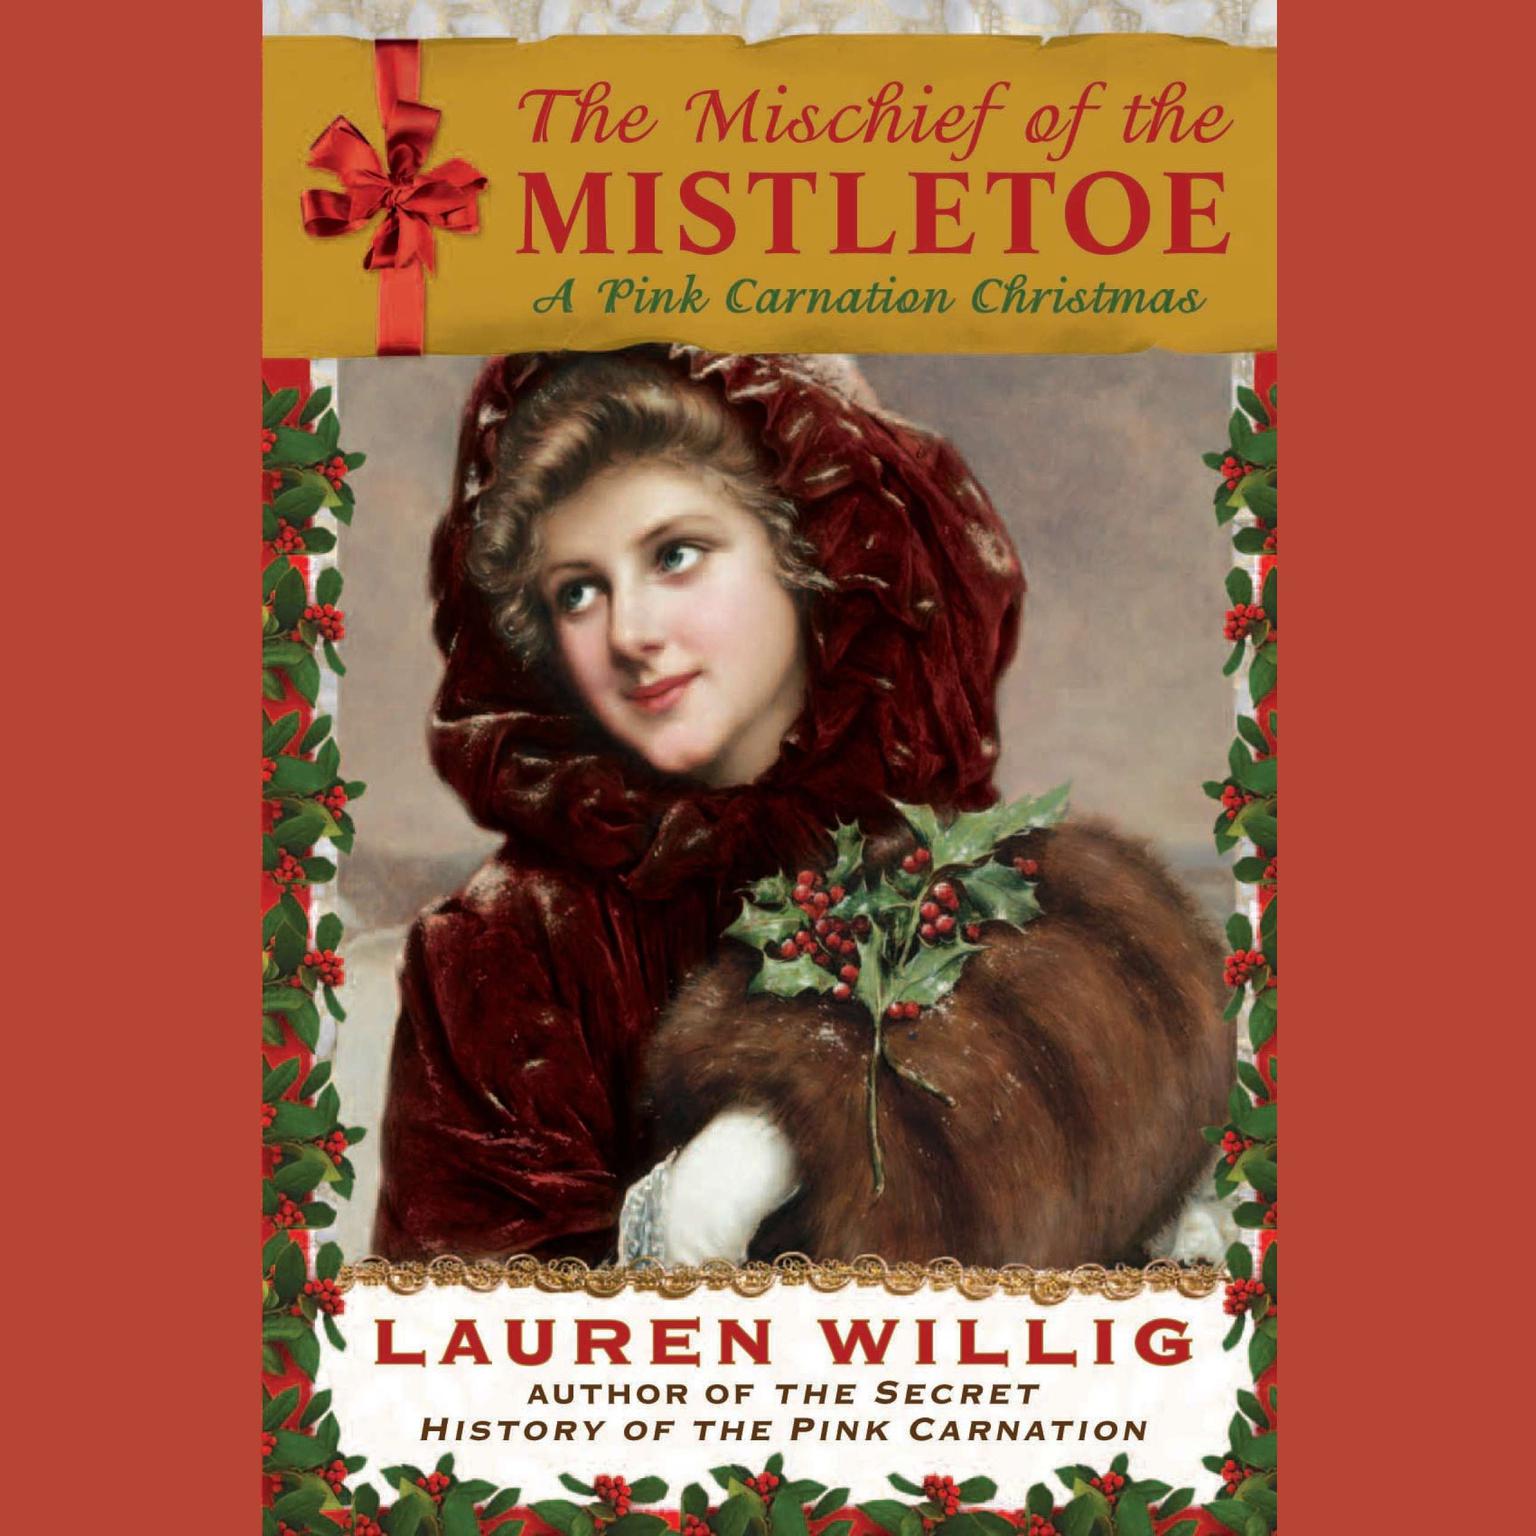 The Mischief of the Mistletoe: A Pink Carnation Christmas Audiobook, by Lauren Willig